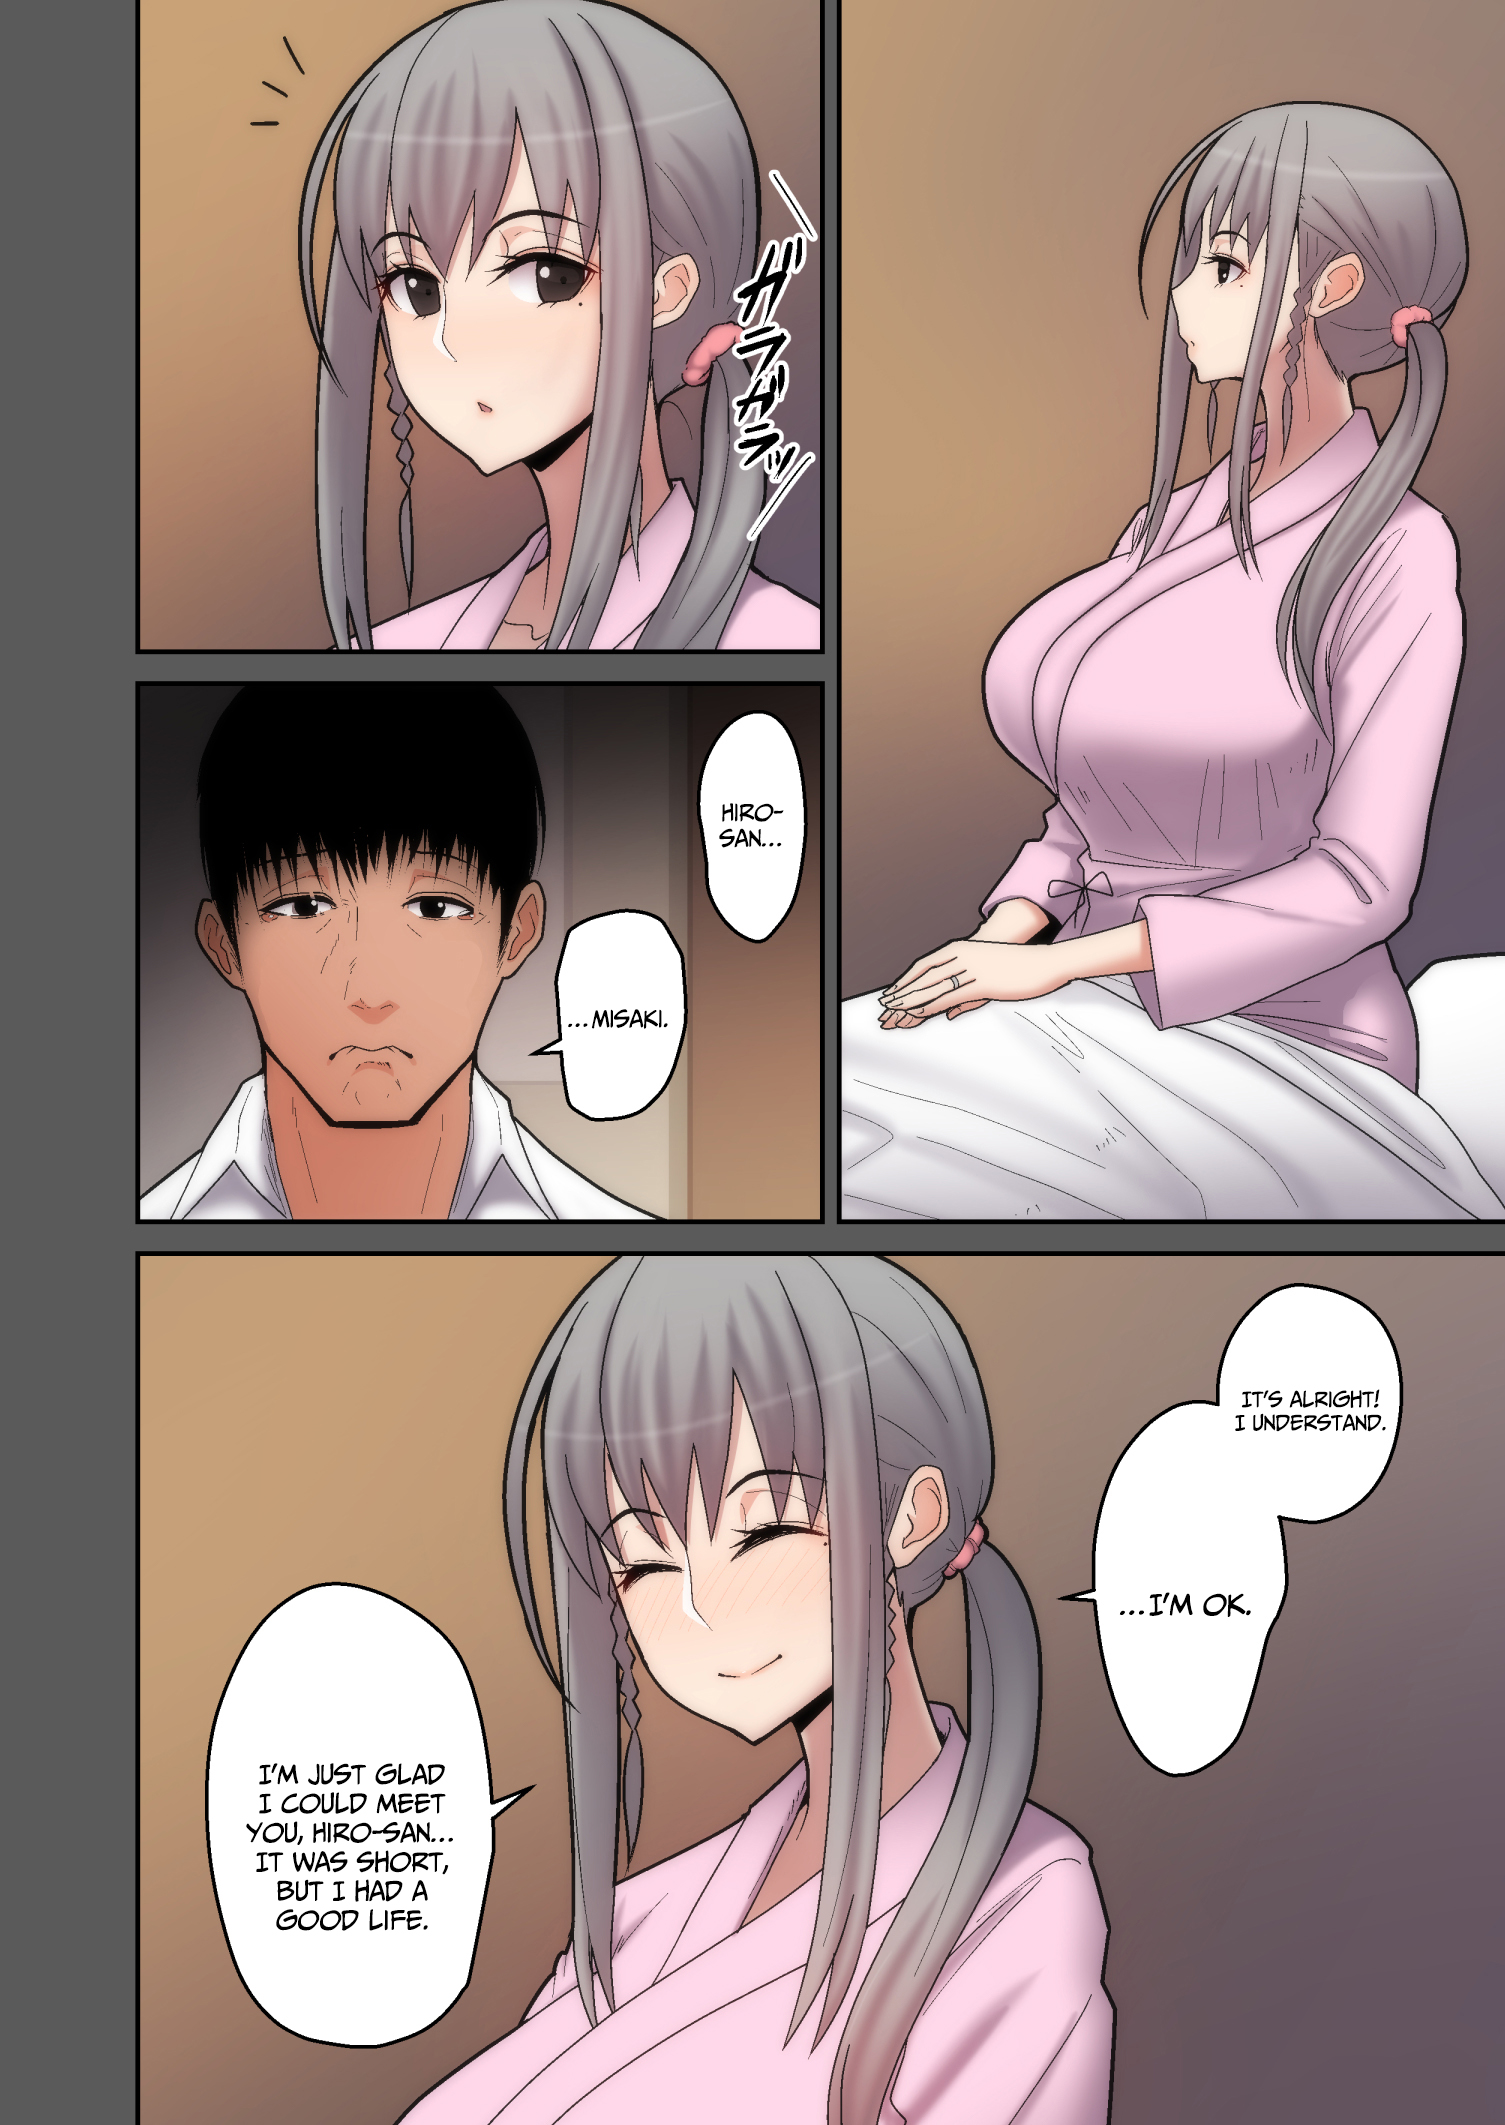 Husband must watch cheating wife fuck or shell die - hentai comics image